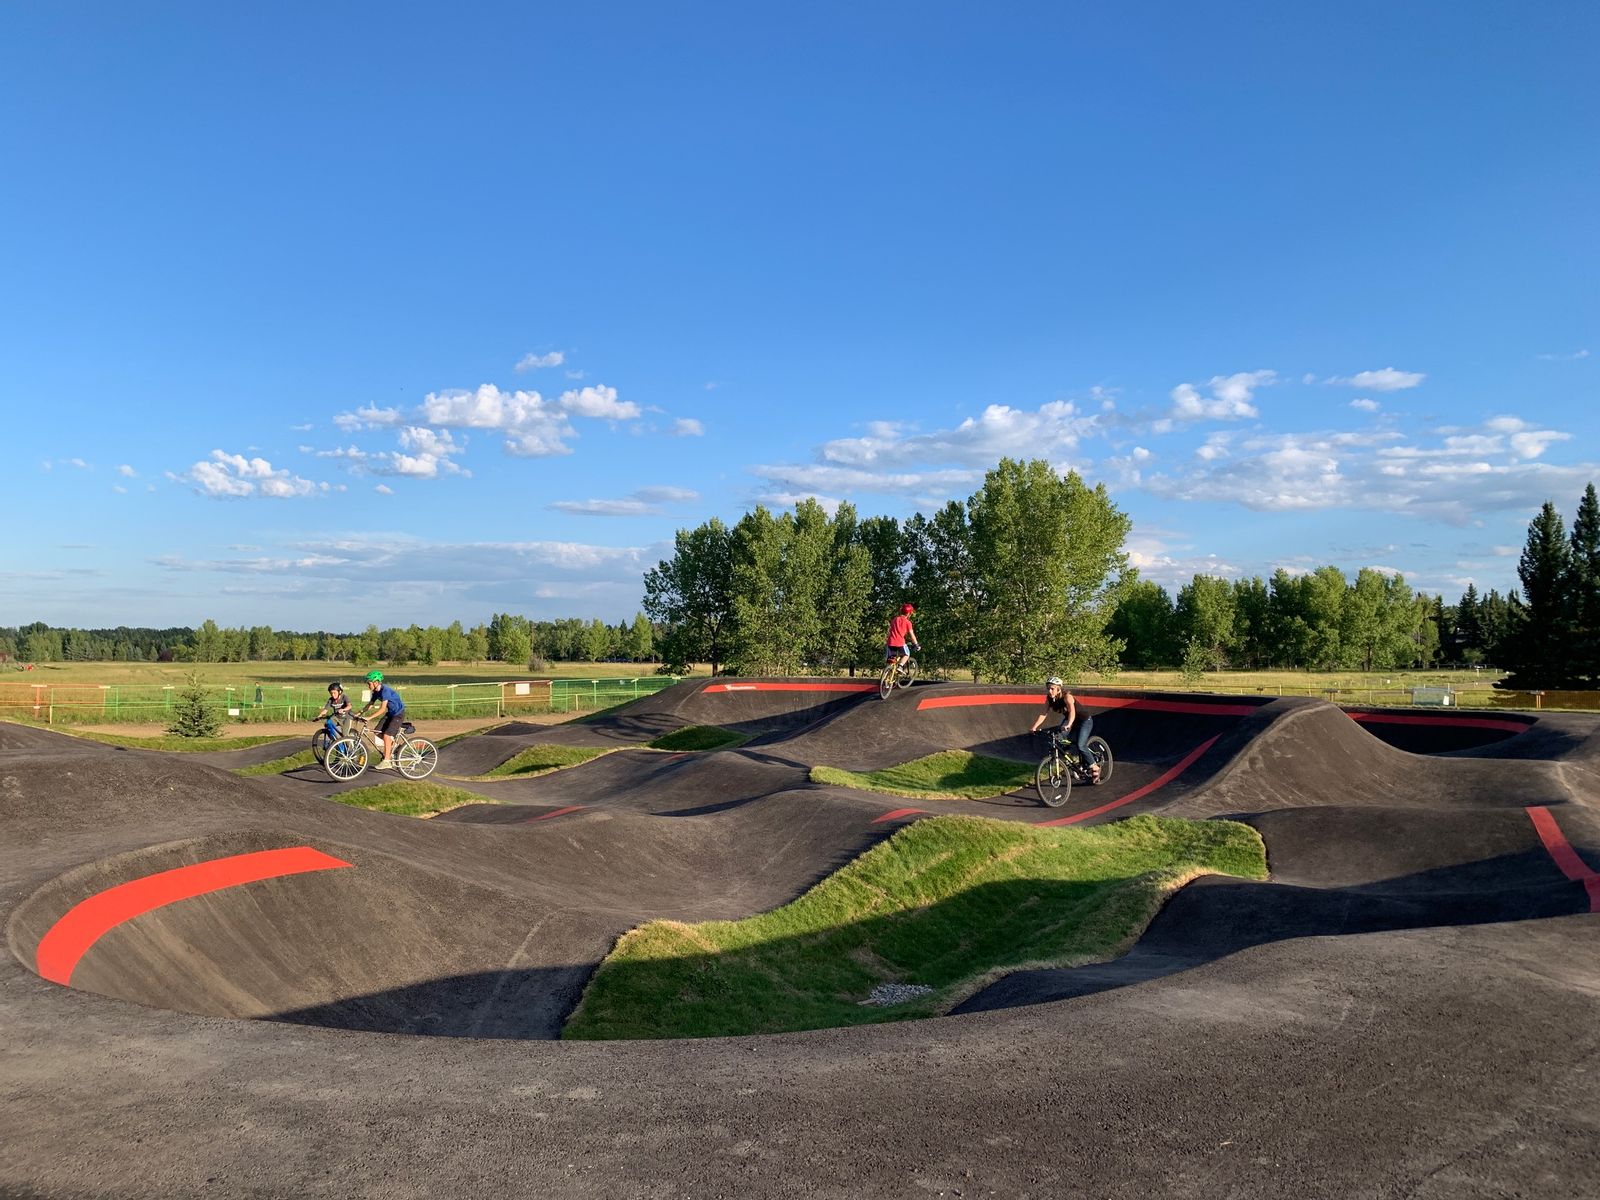 Inglewood Pump Track in Calgary formally opened: New Playground for Cyclists